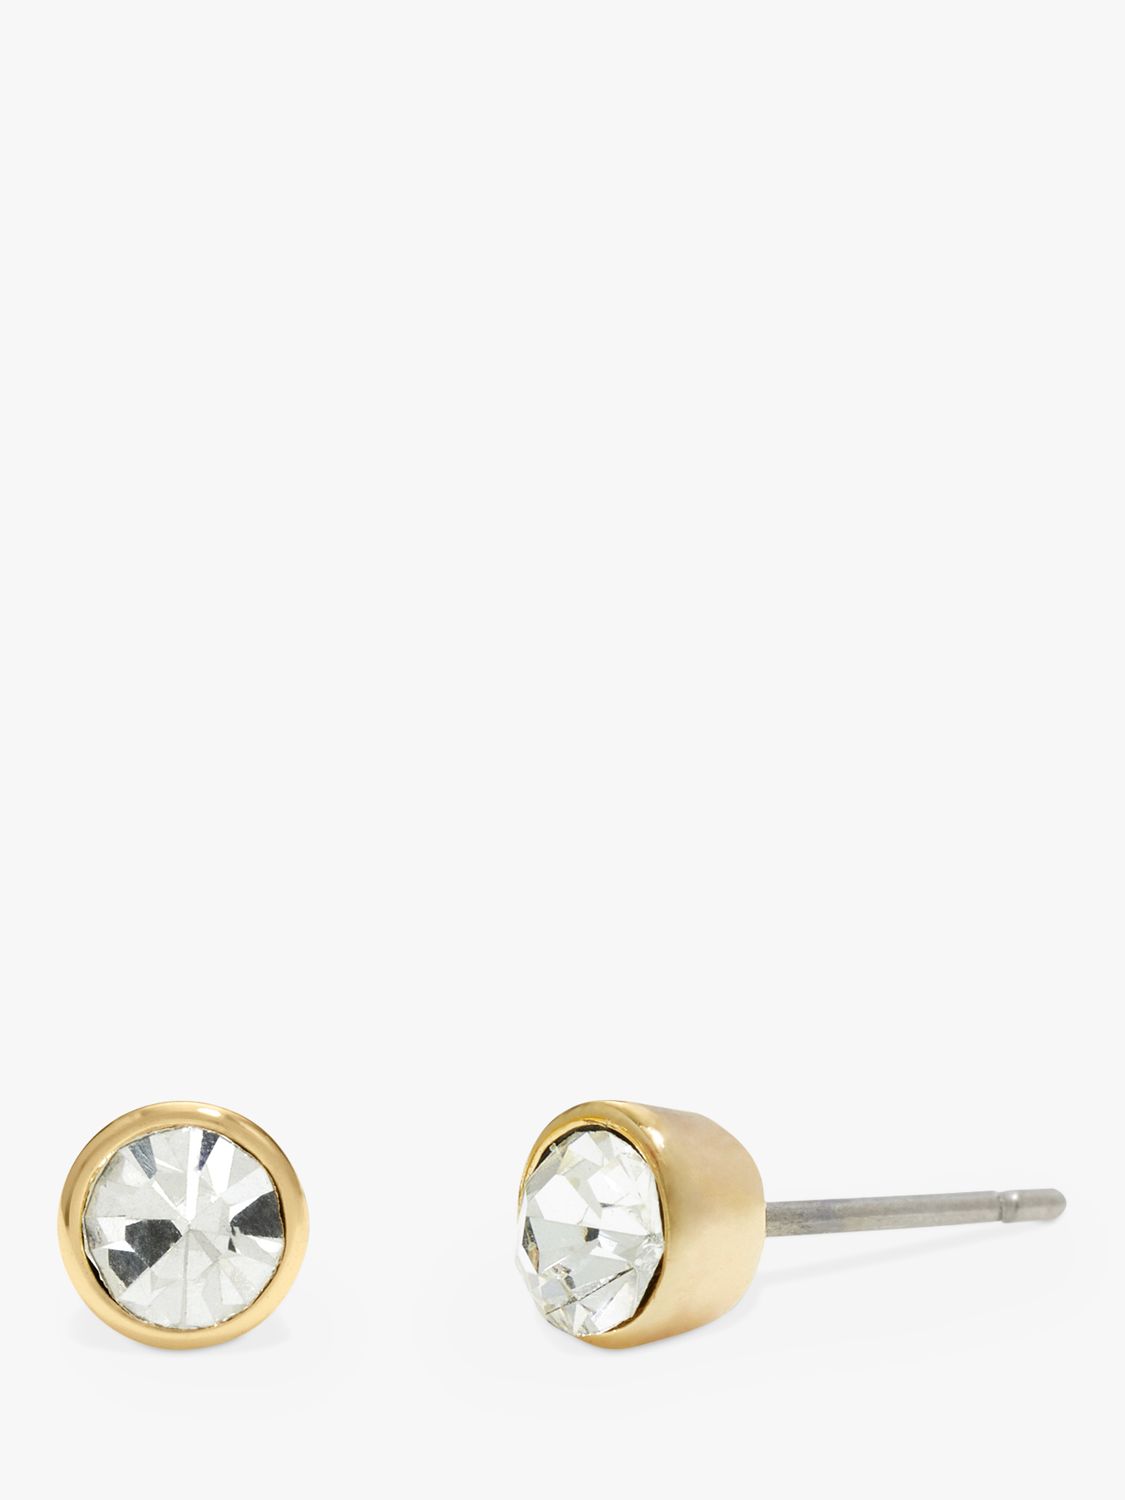 Buy Coach Crystal Halo Pave Stud Earrings, Gold Online at johnlewis.com